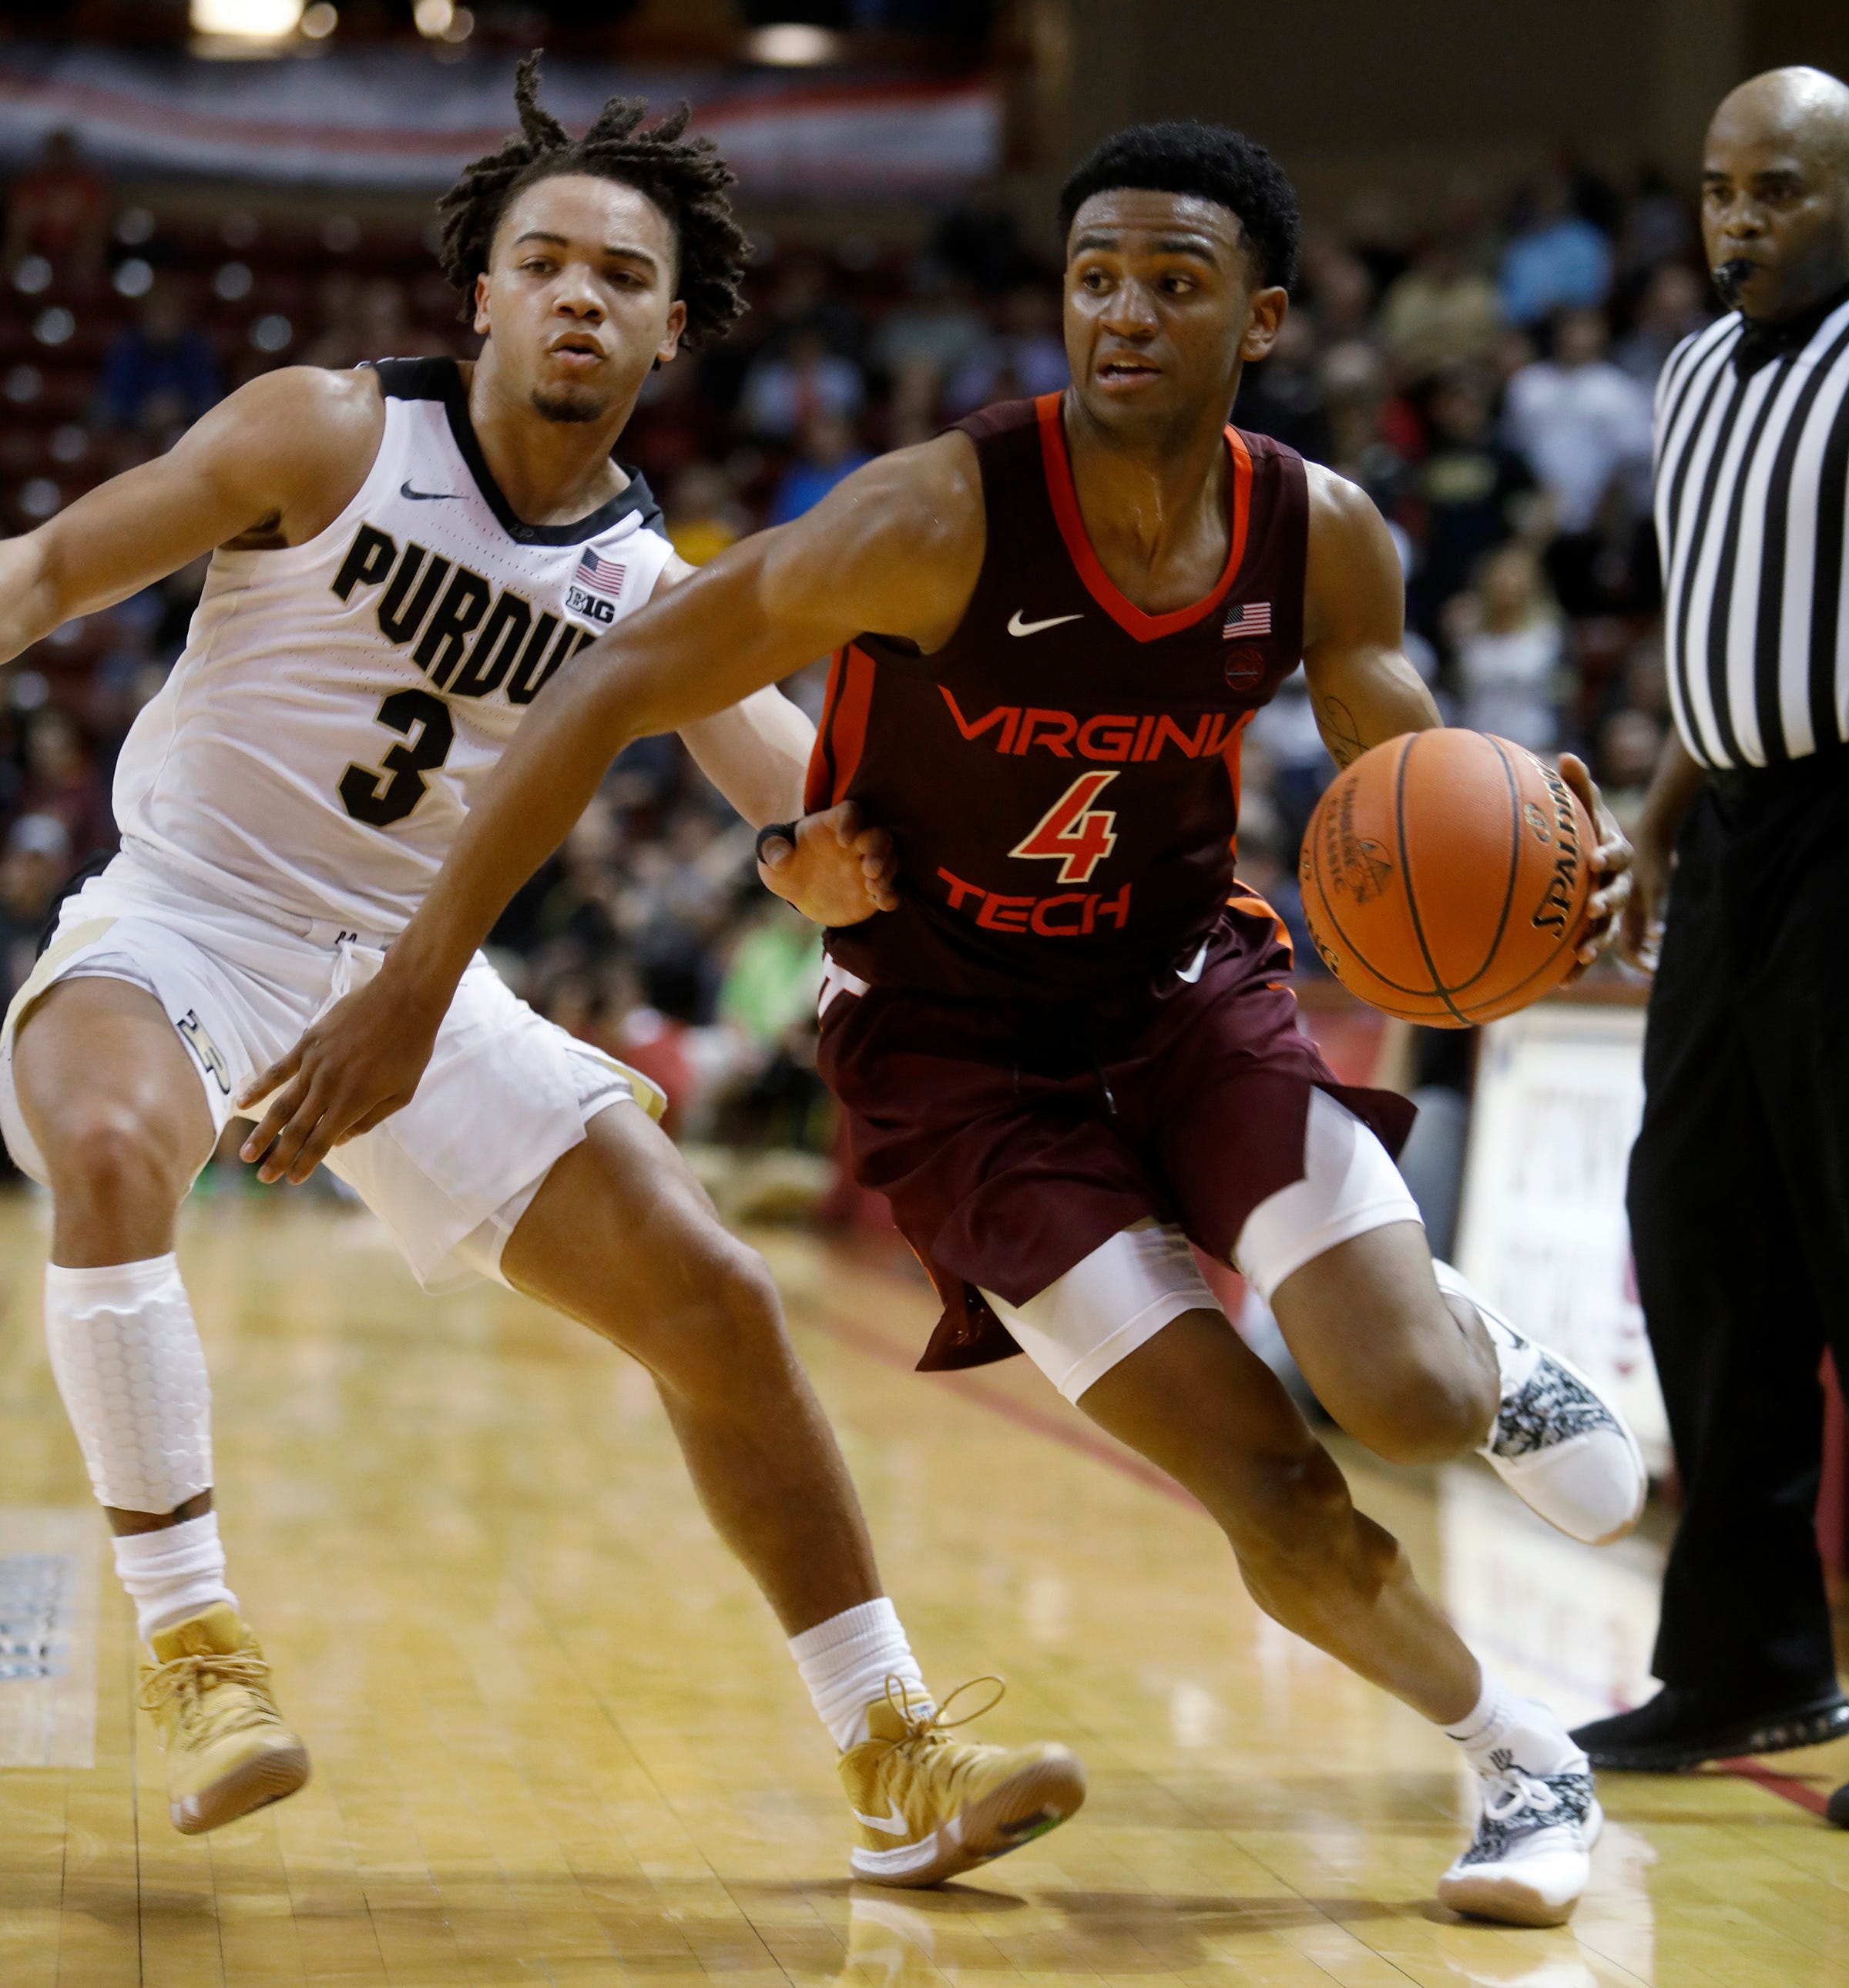 18. Indiana Pacers: Nickeil Alexander-Walker, guard, Virginia Tech. After an injury-riddled season, the Pacers need to get some depth in their backcourt and Alexander-Walker is a good addition. He has good size for a shooting guard and he’ll help almost immediately along with Victor Oladipo.